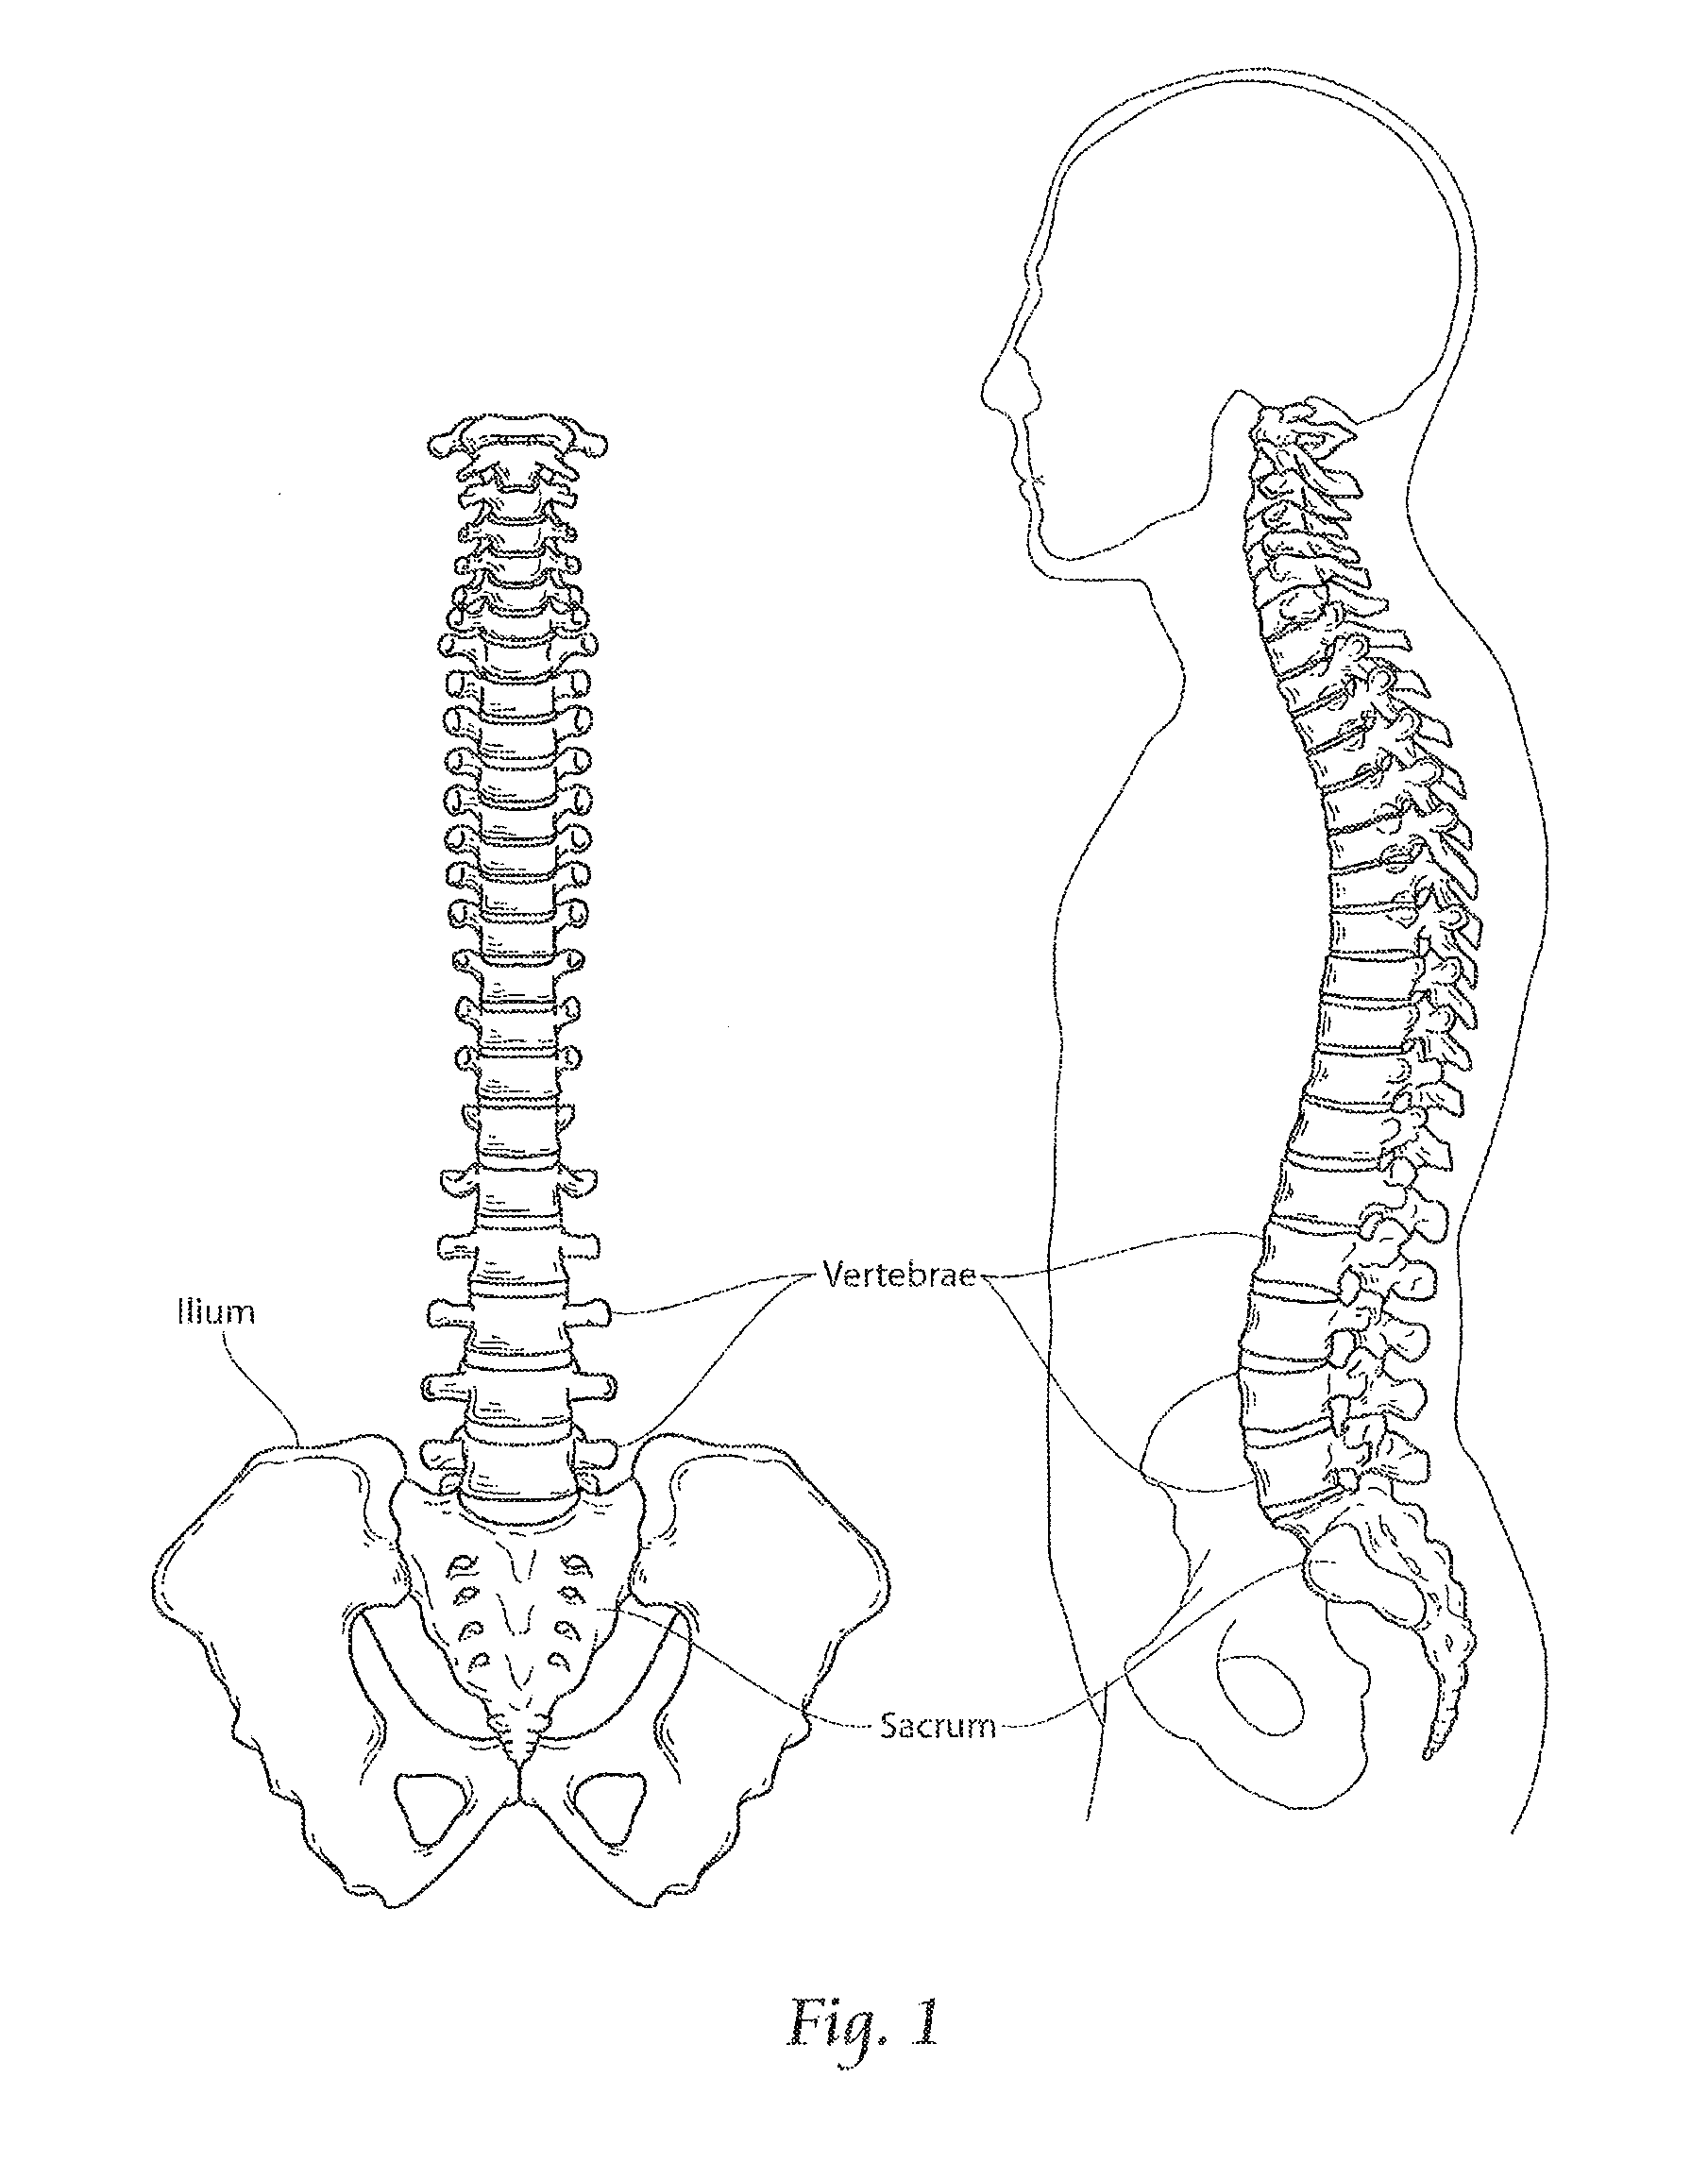 Apparatus, systems, and methods for stabilizing a spondylolisthesis